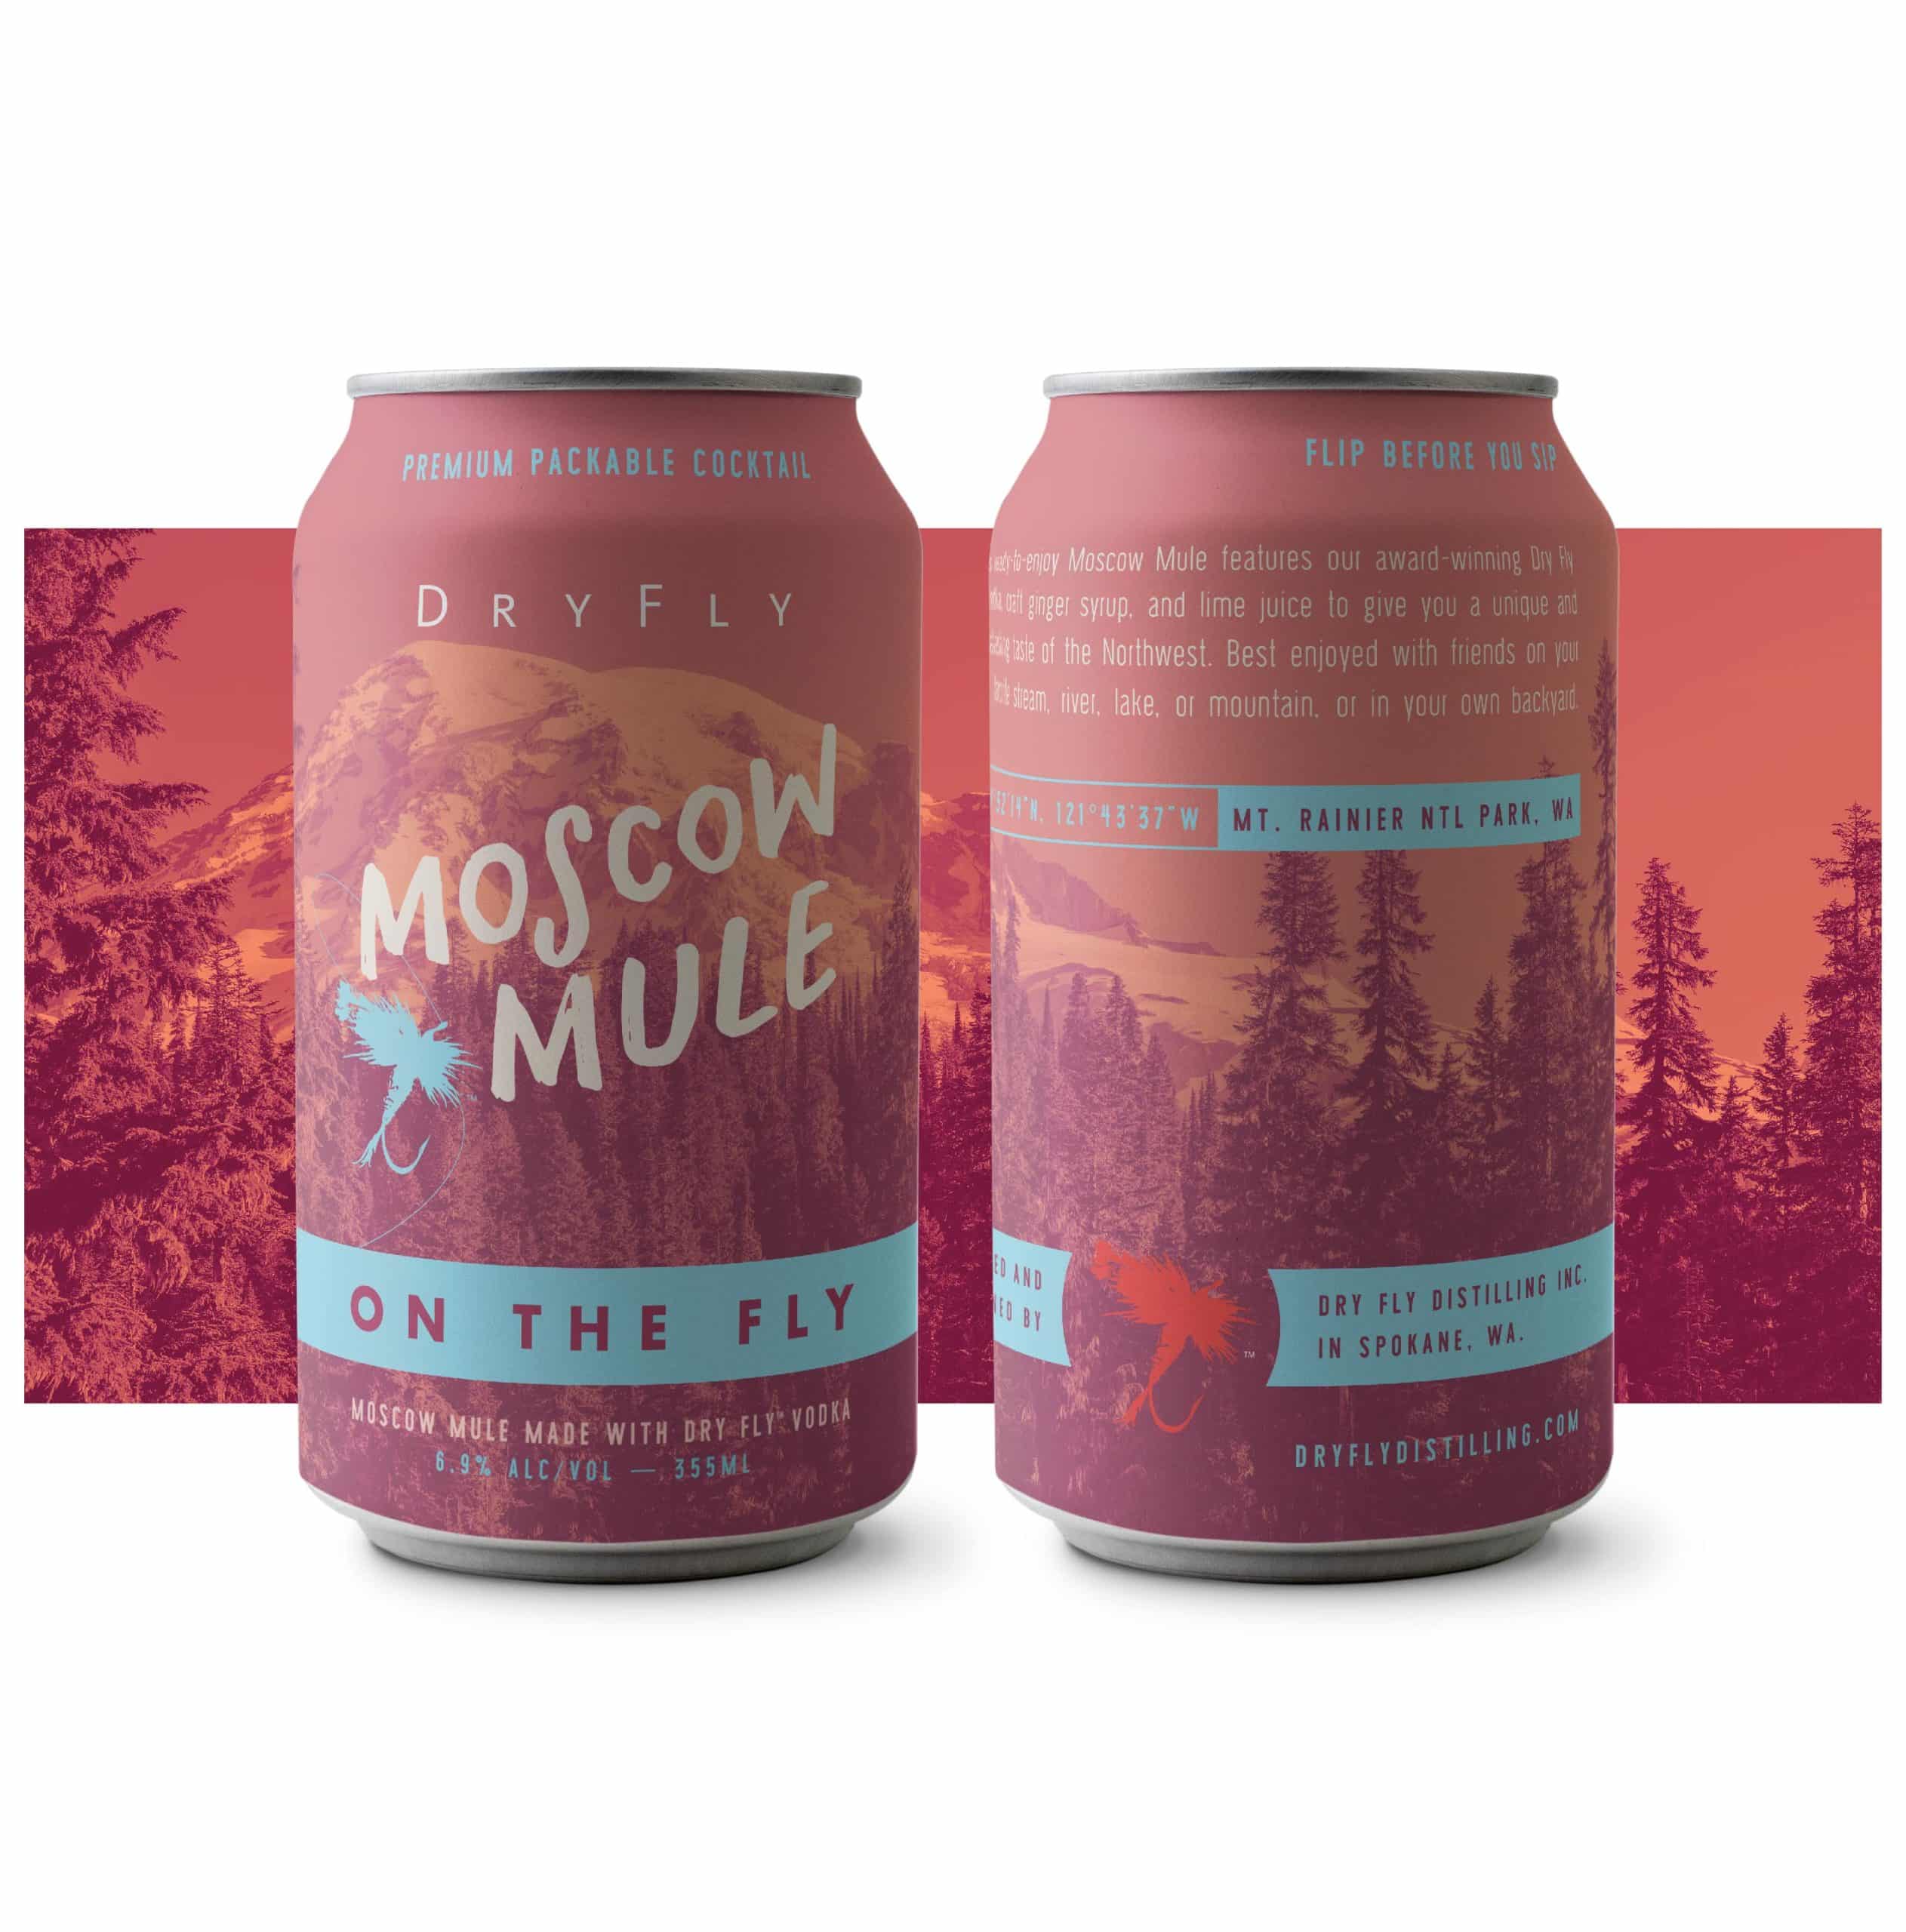 Dry Fly Moscow Mule Canned Cocktail Packaging Design